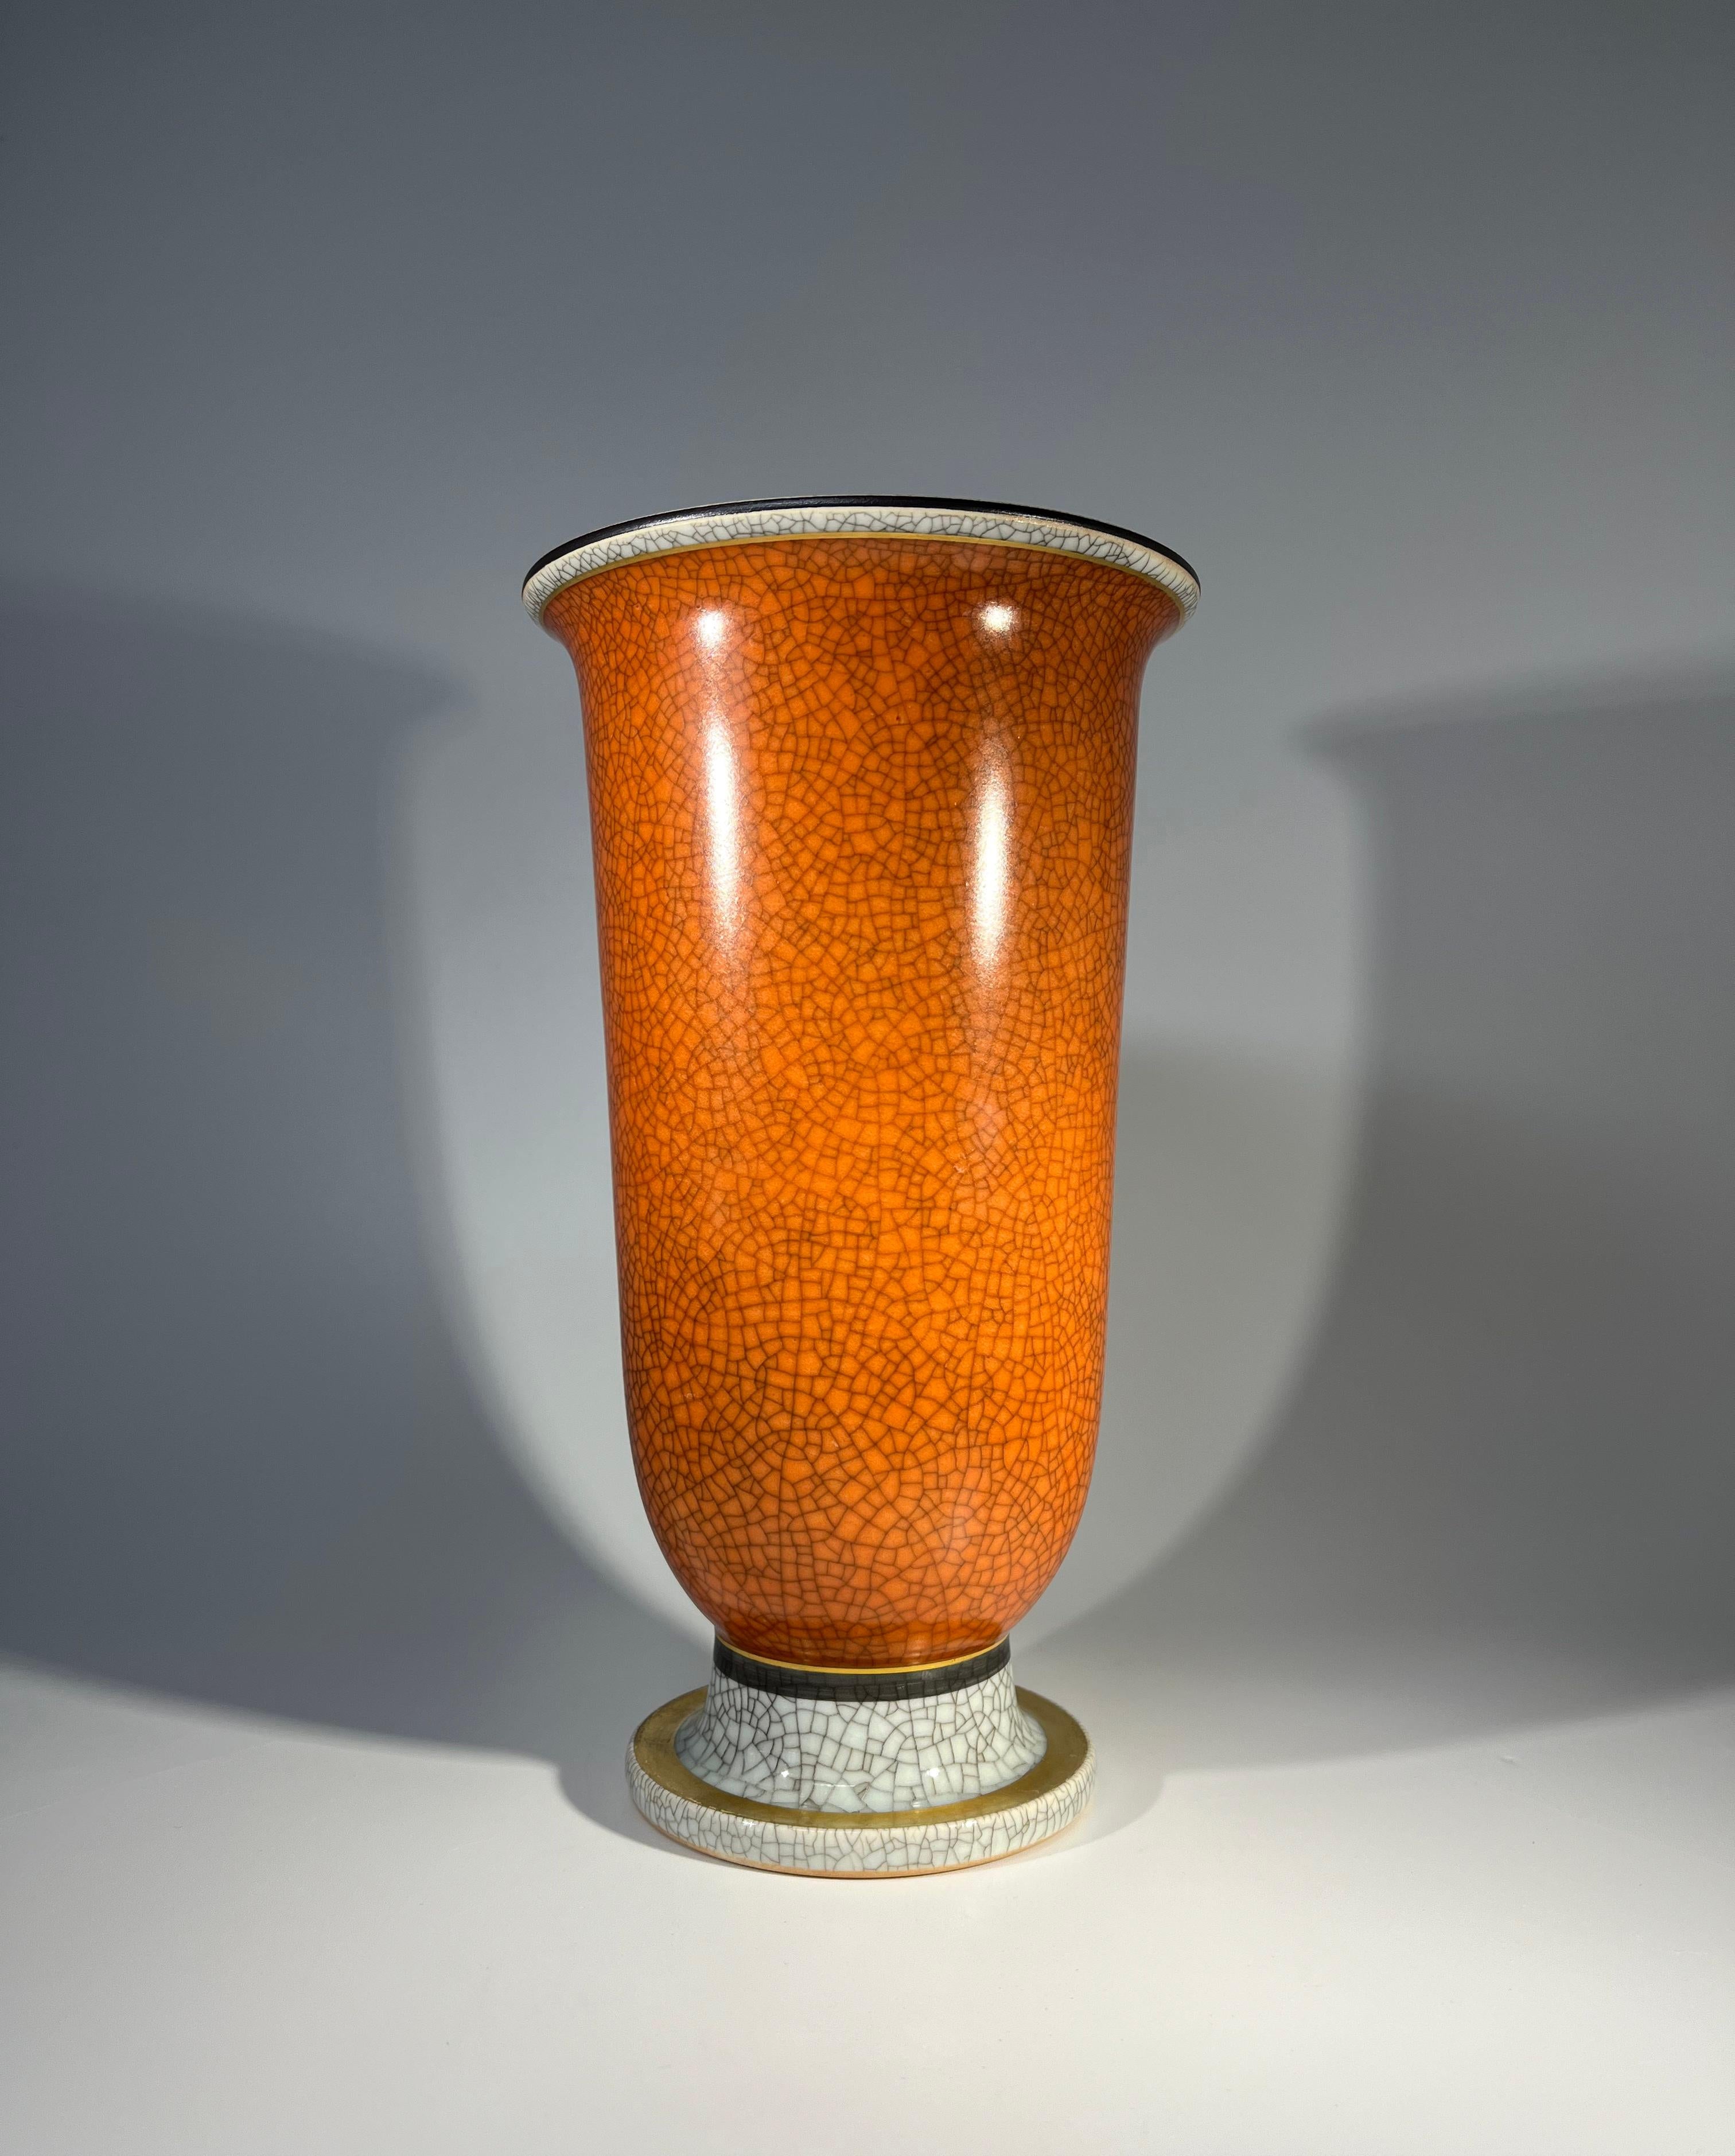 Graceful Royal Copenhagen porcelain terracotta and grey crackle glazed vase with gilded banding on base.
Designed by Thorkild Olsen
Circa 1966
Stamped and numbered 3378
Height 8.25 inch, Diameter 4.5 inch
Good condition. Minor scratch marks to base